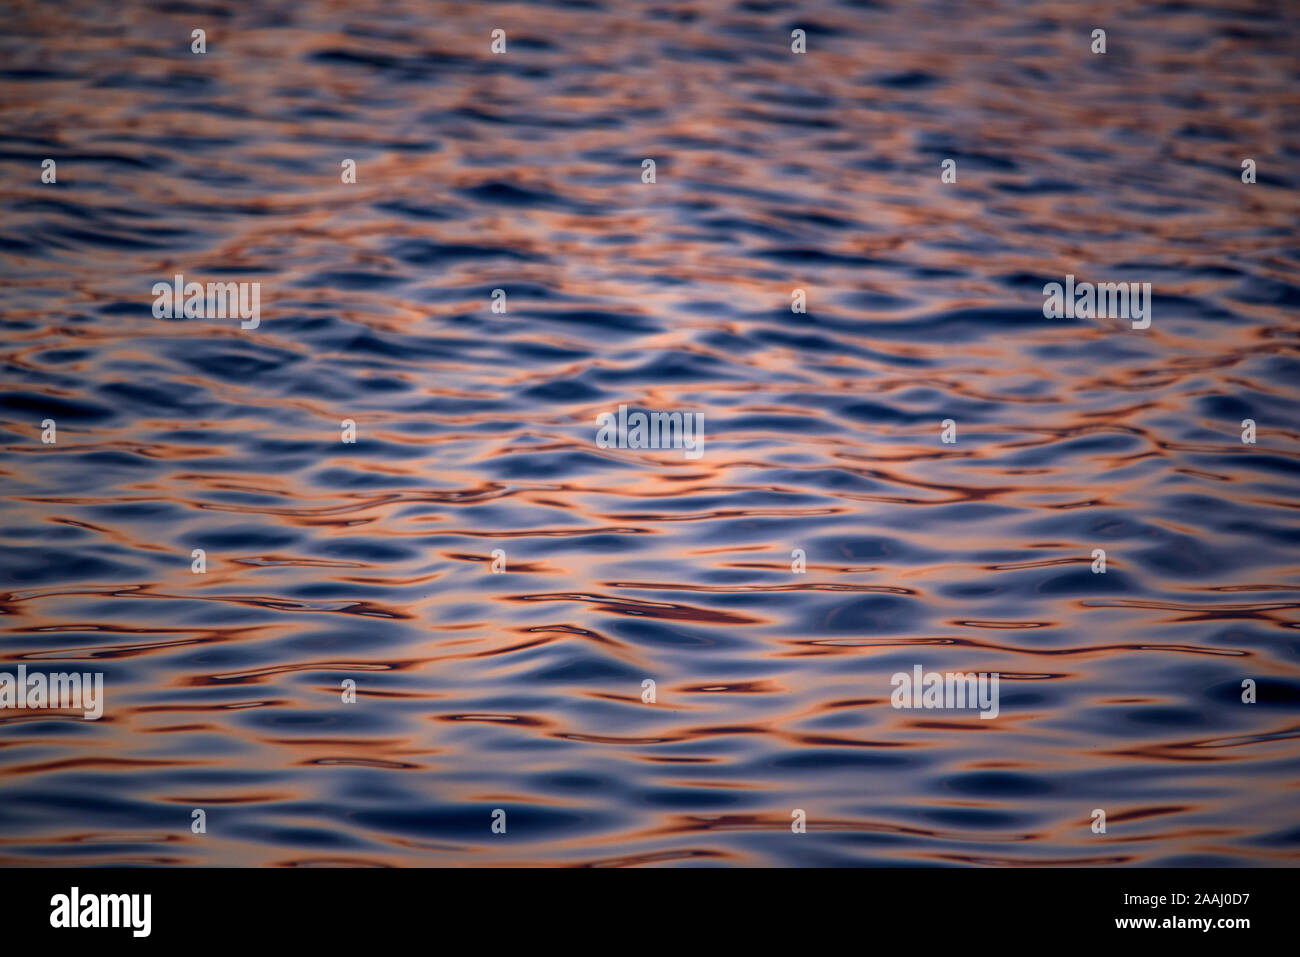 Close-up of gentle sea waves in the golden sunlight. Light reflections on the water. Stock Photo